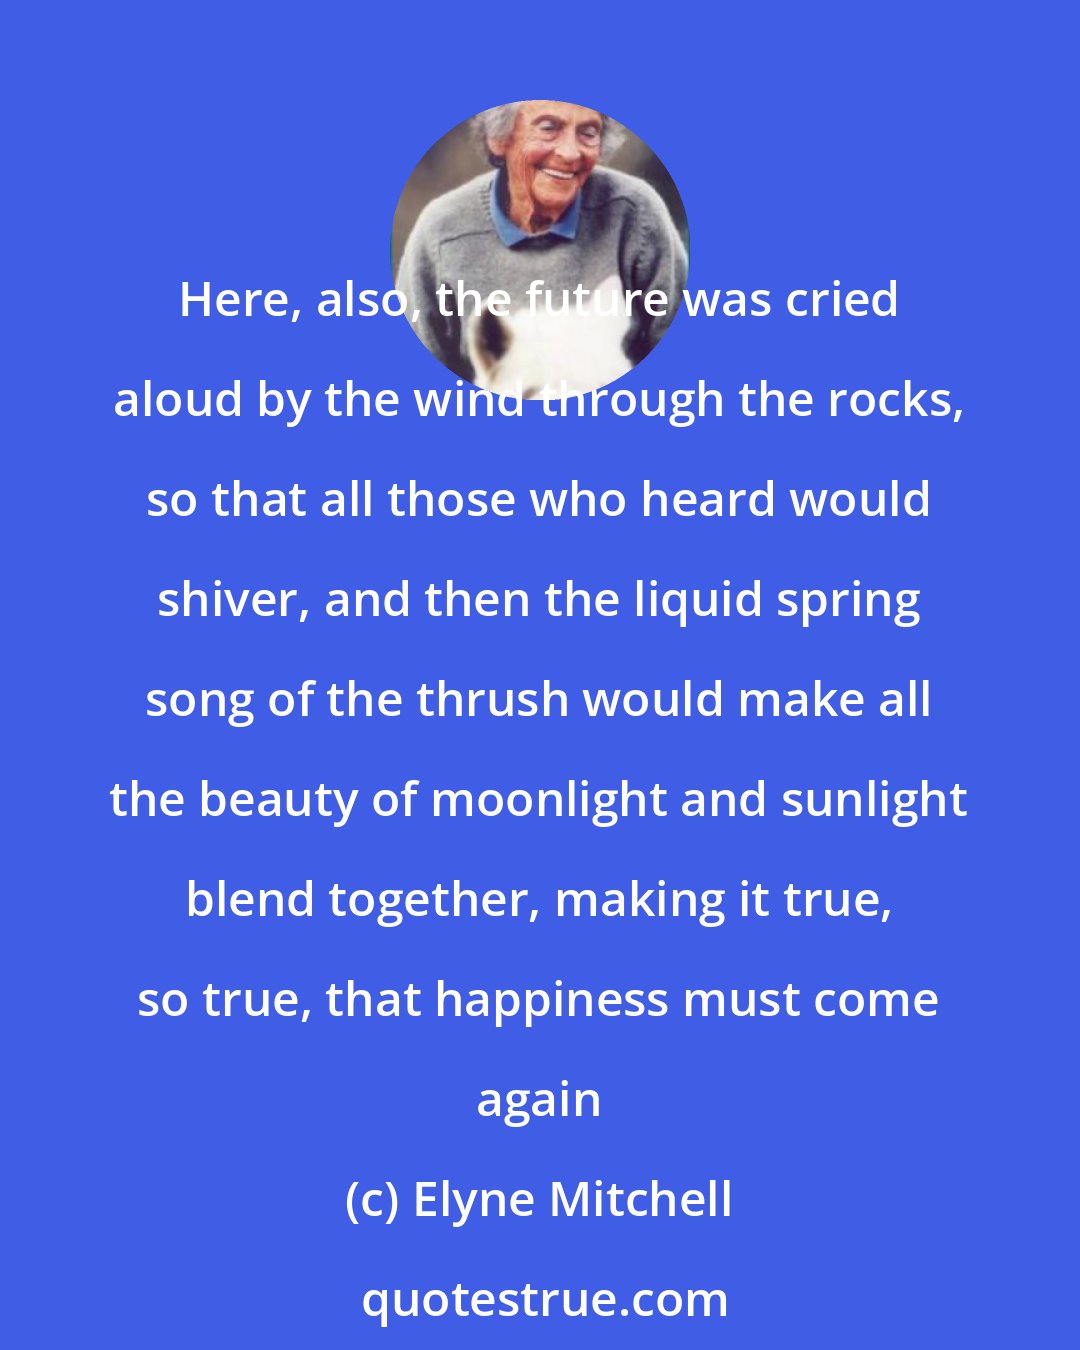 Elyne Mitchell: Here, also, the future was cried aloud by the wind through the rocks, so that all those who heard would shiver, and then the liquid spring song of the thrush would make all the beauty of moonlight and sunlight blend together, making it true, so true, that happiness must come again